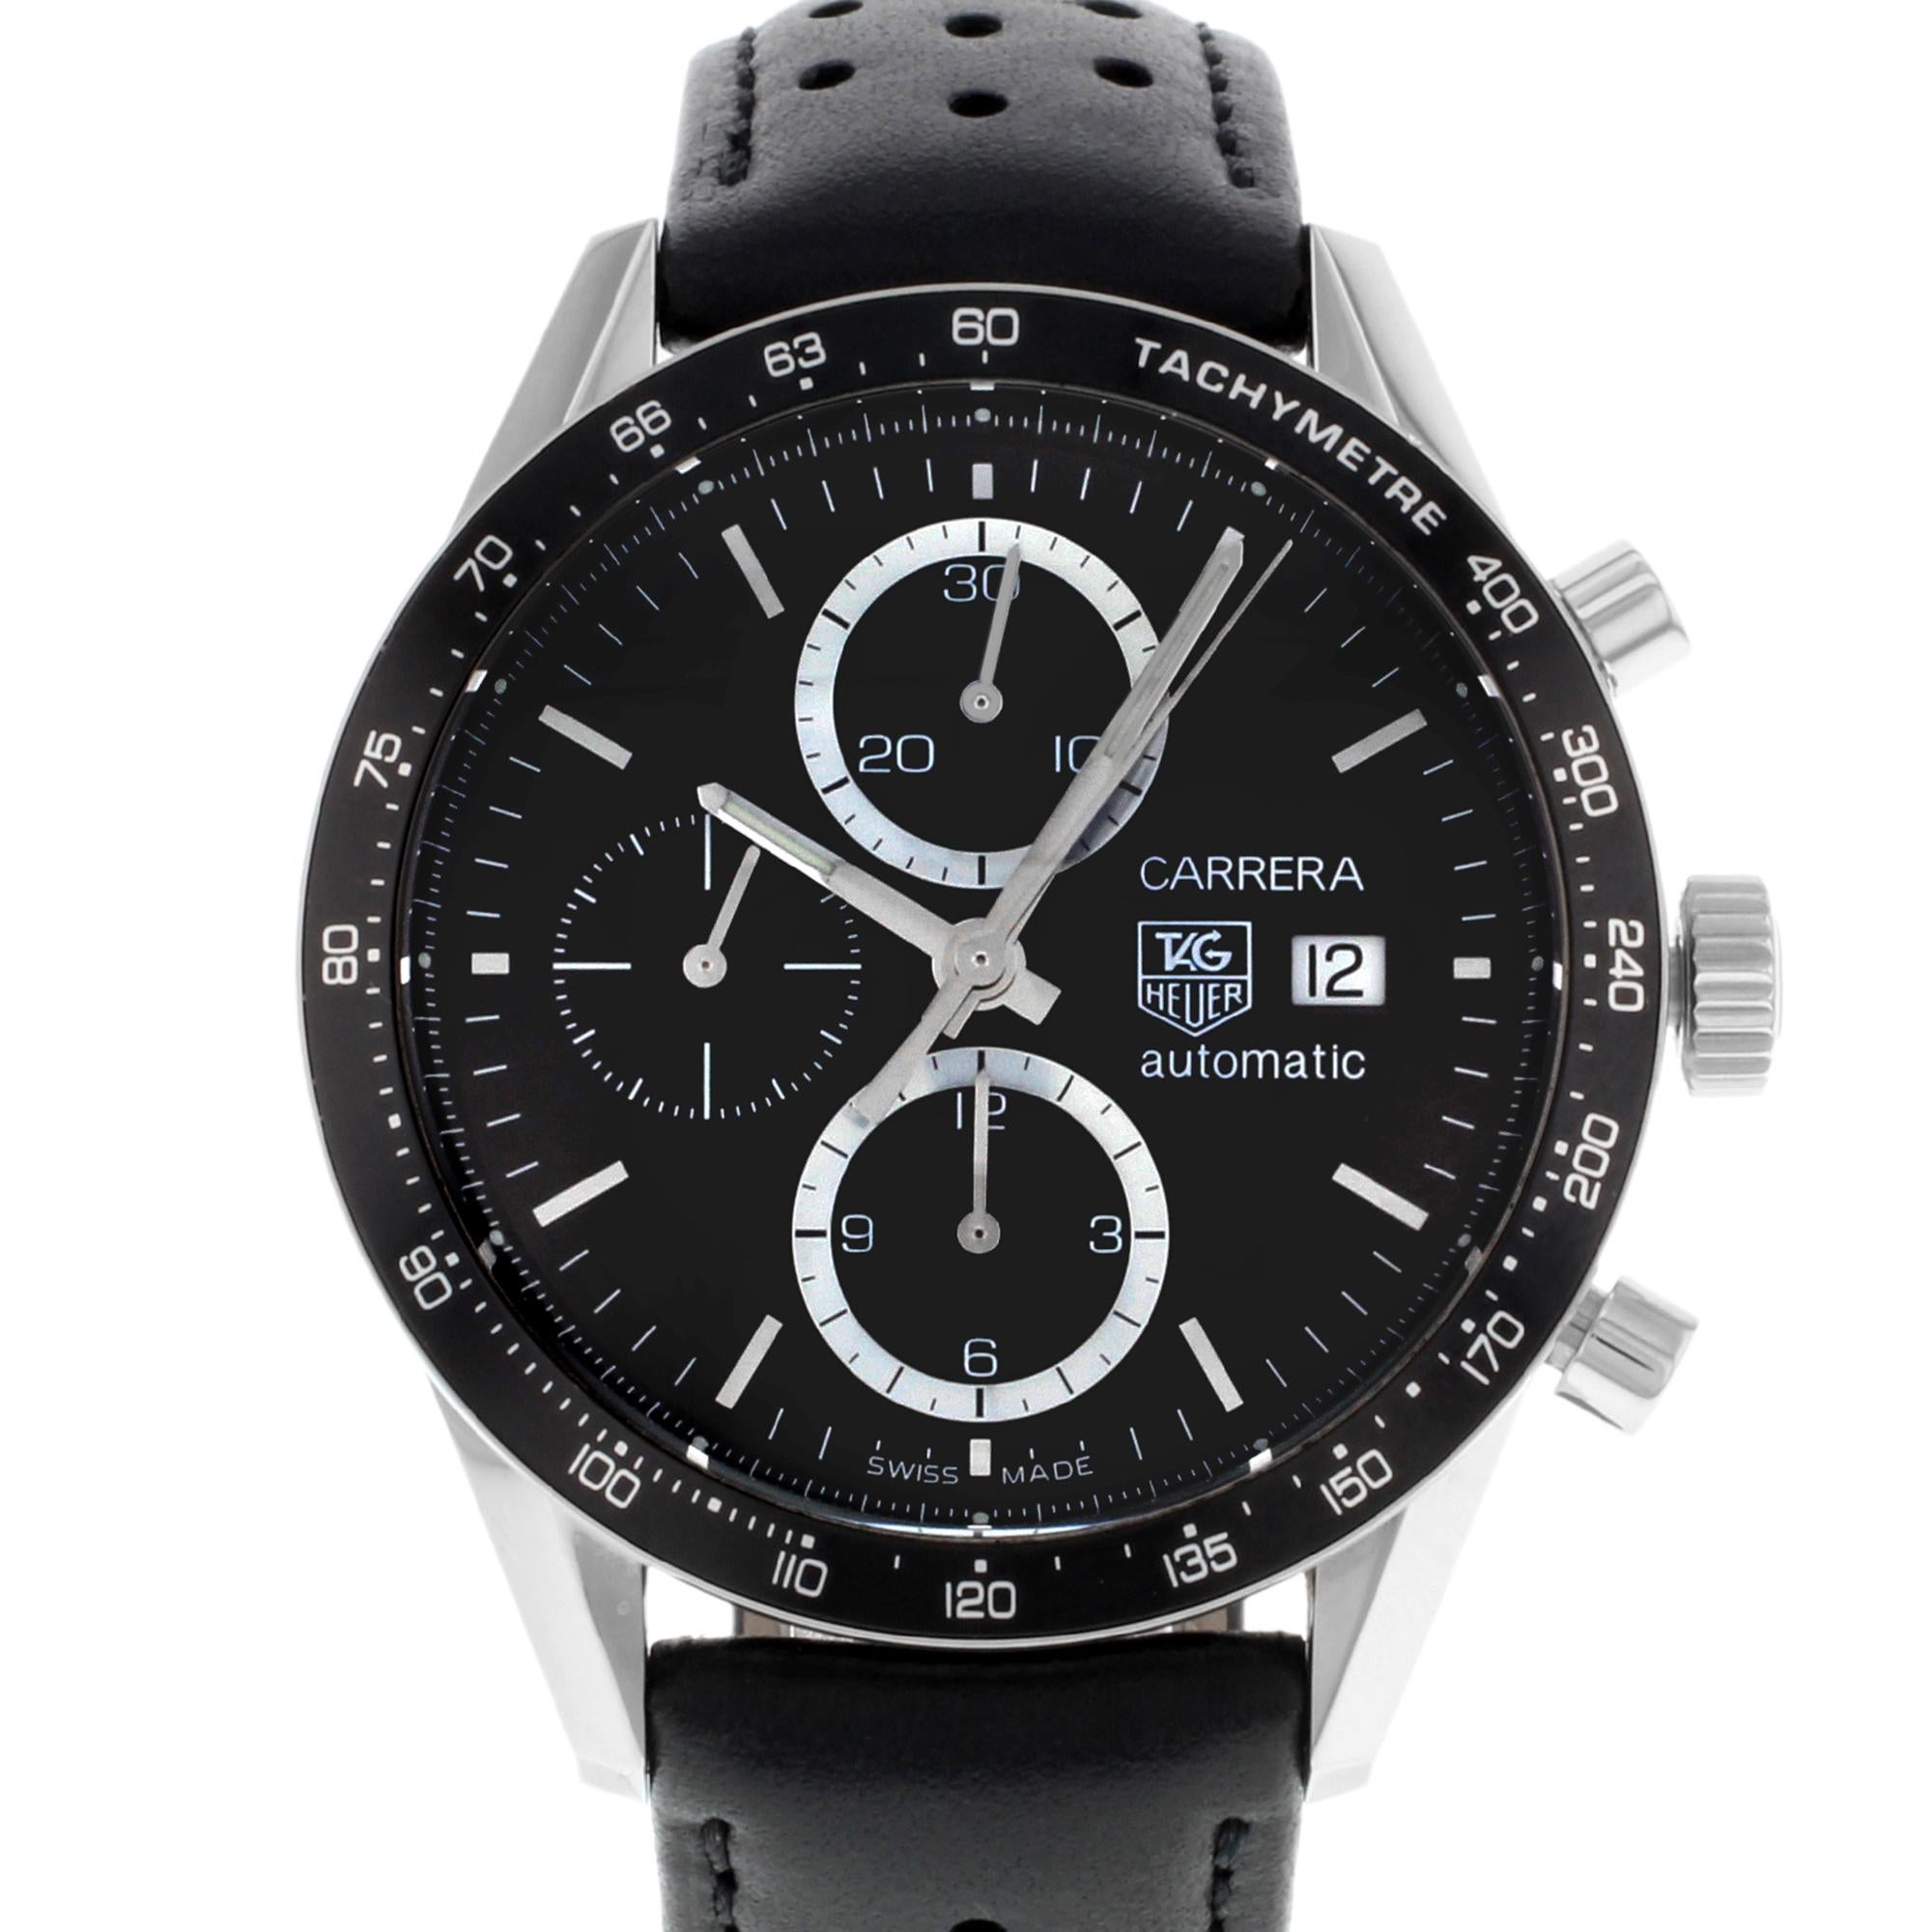 This pre-owned TAG Heuer Carrera CV2010.FC6233 is a beautiful men's timepiece that is powered by mechanical (automatic) movement which is cased in a stainless steel case. It has a round shape face, chronograph, date indicator, small seconds subdial,